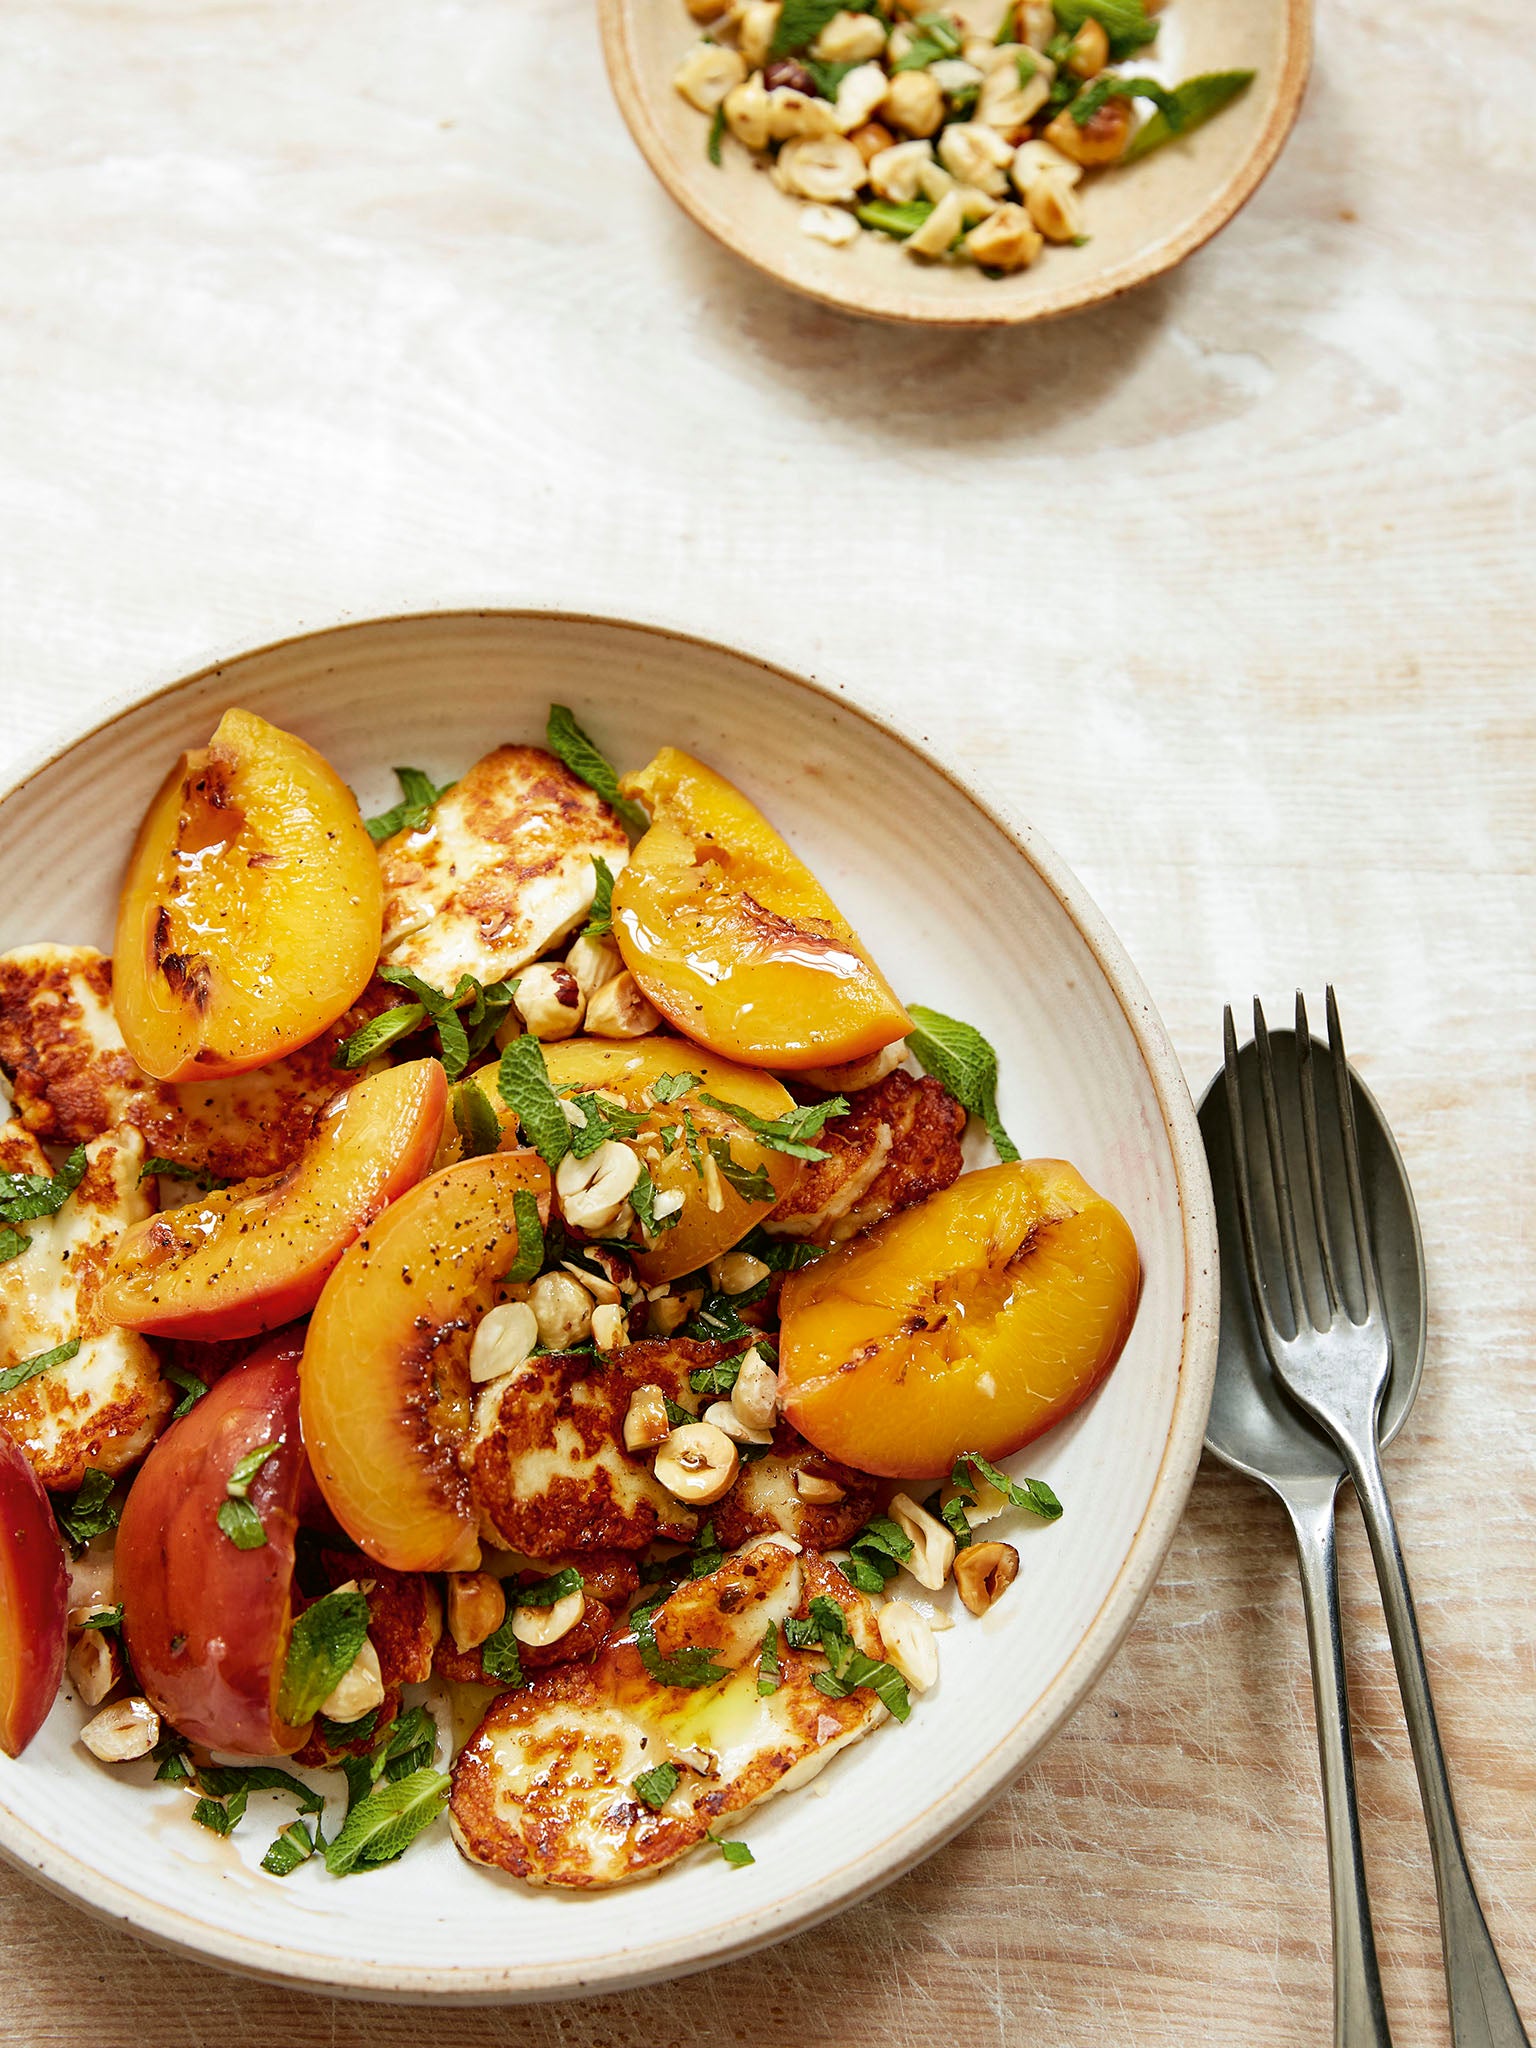 Dried oregano brings even more dpeth of flavour to these poached peaches than fresh